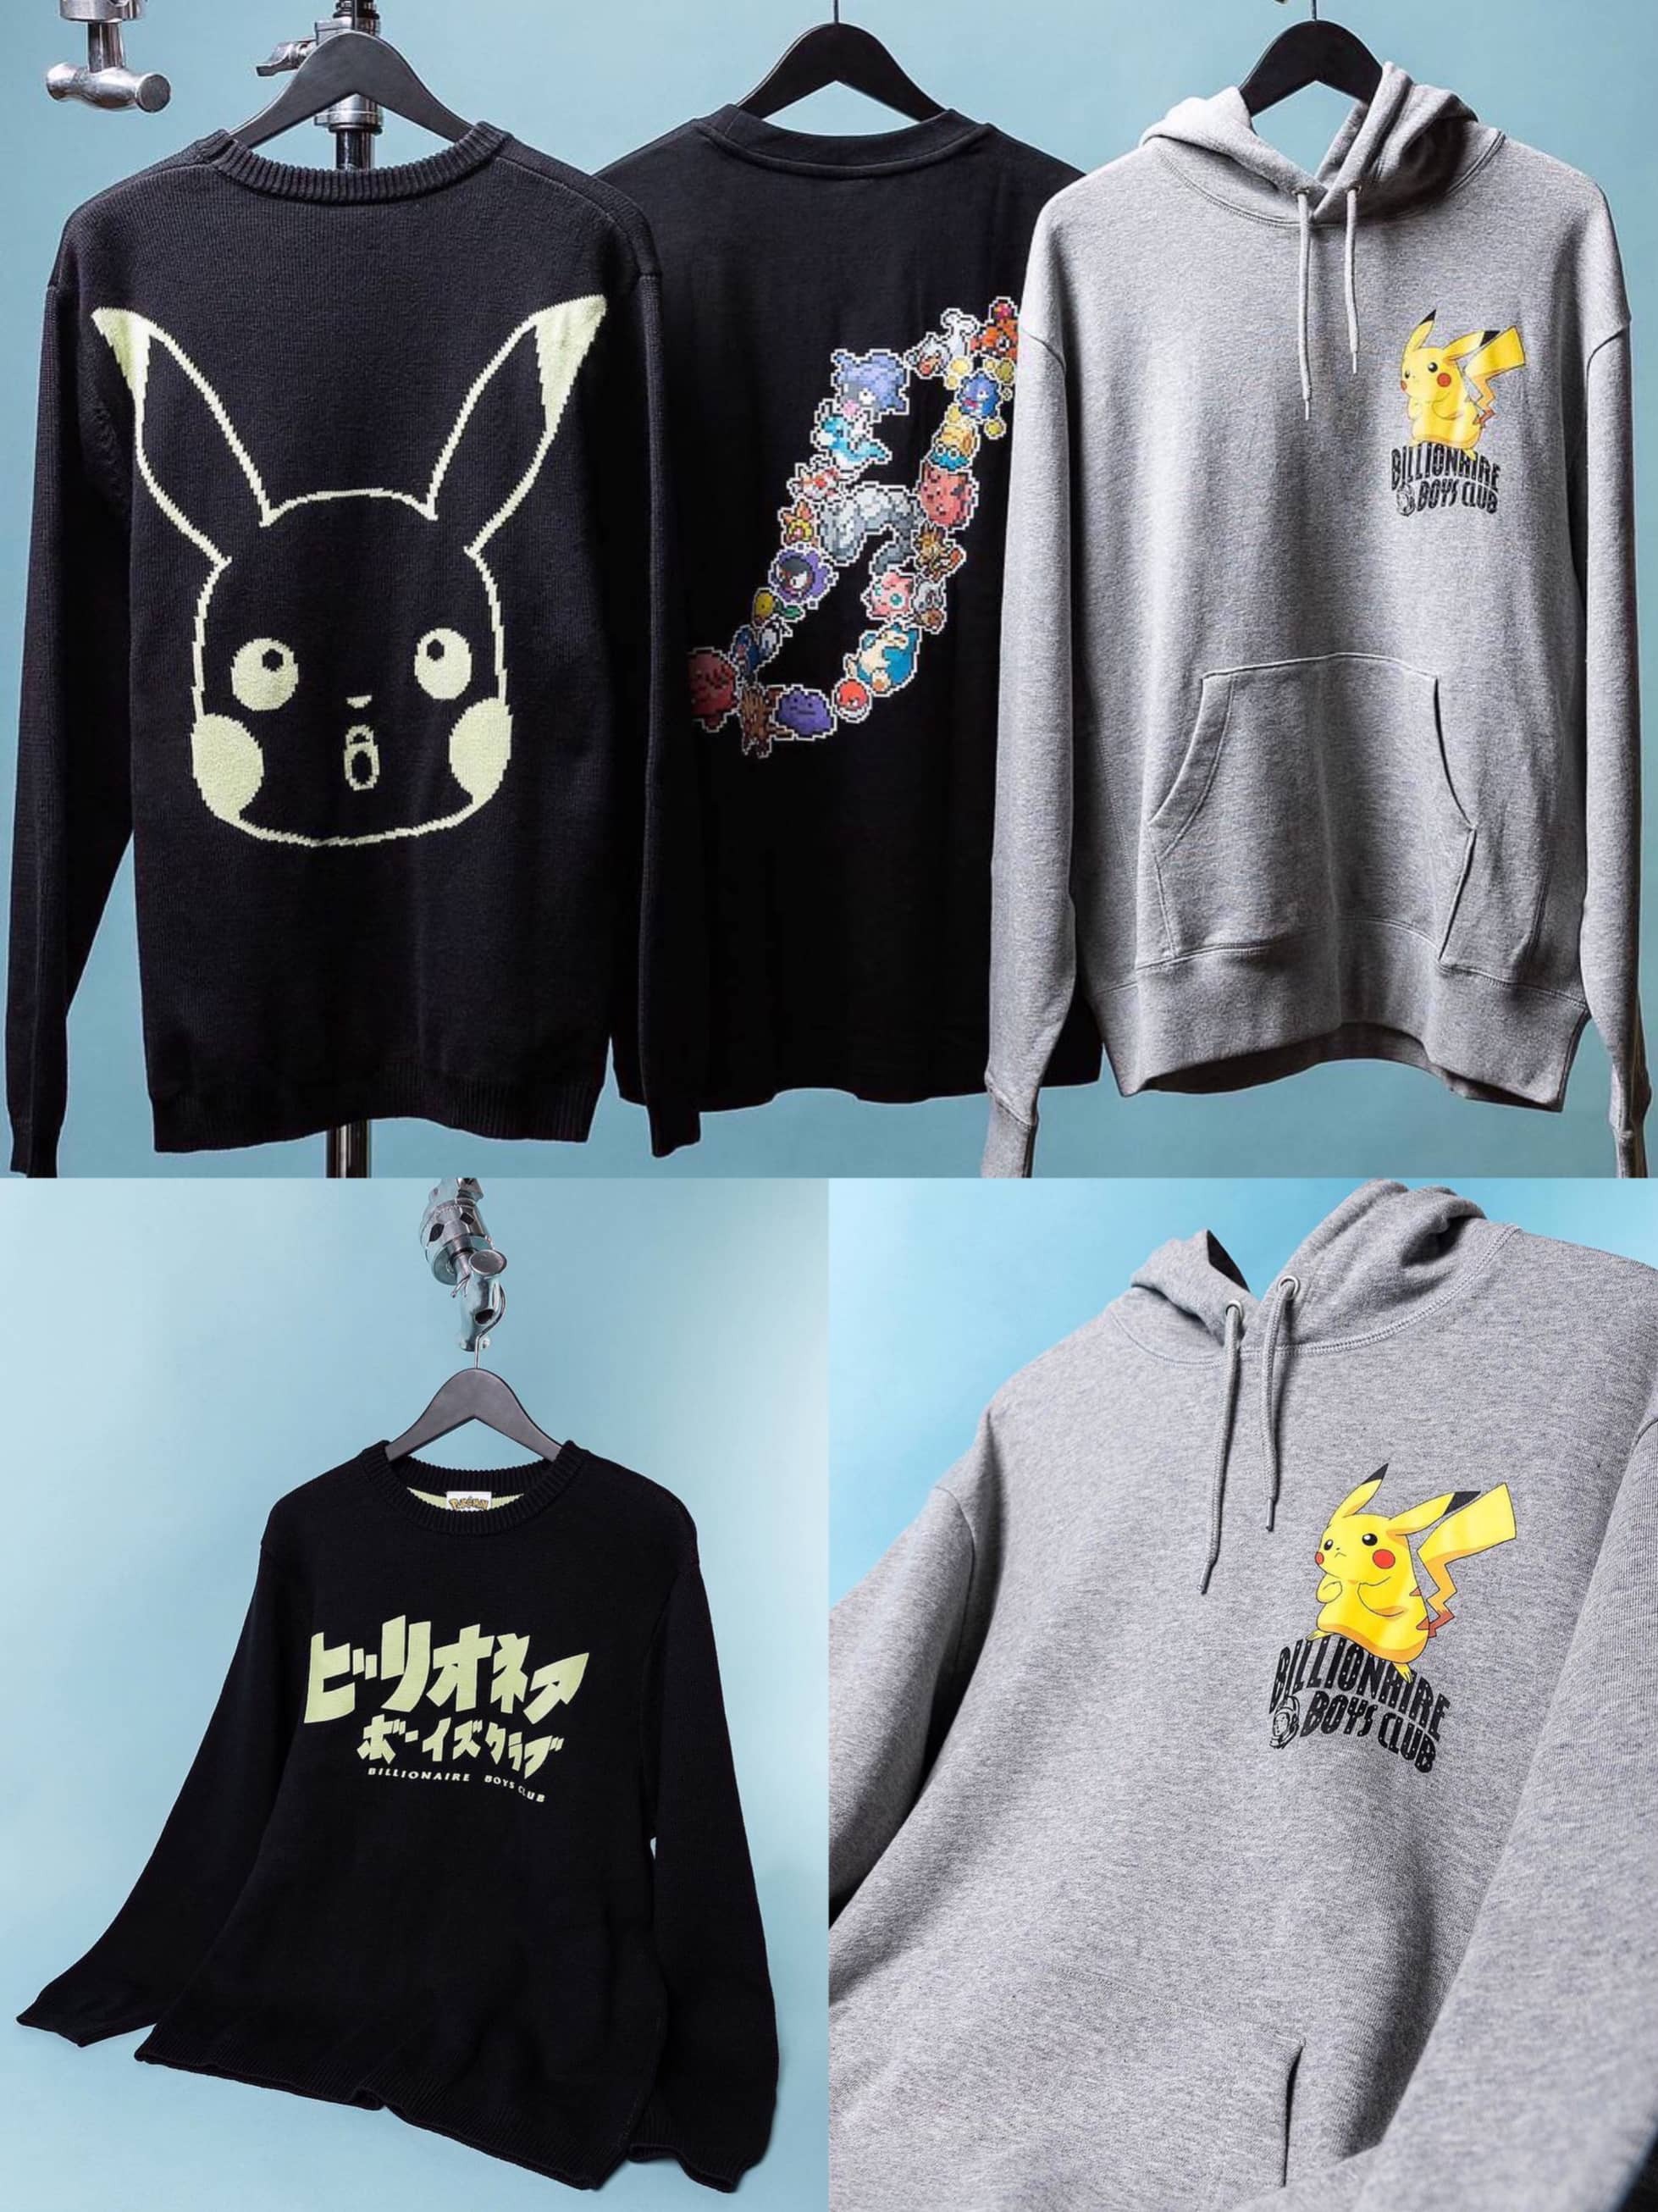 Billionaire Boys Club released a capsule collection with Pokémon.